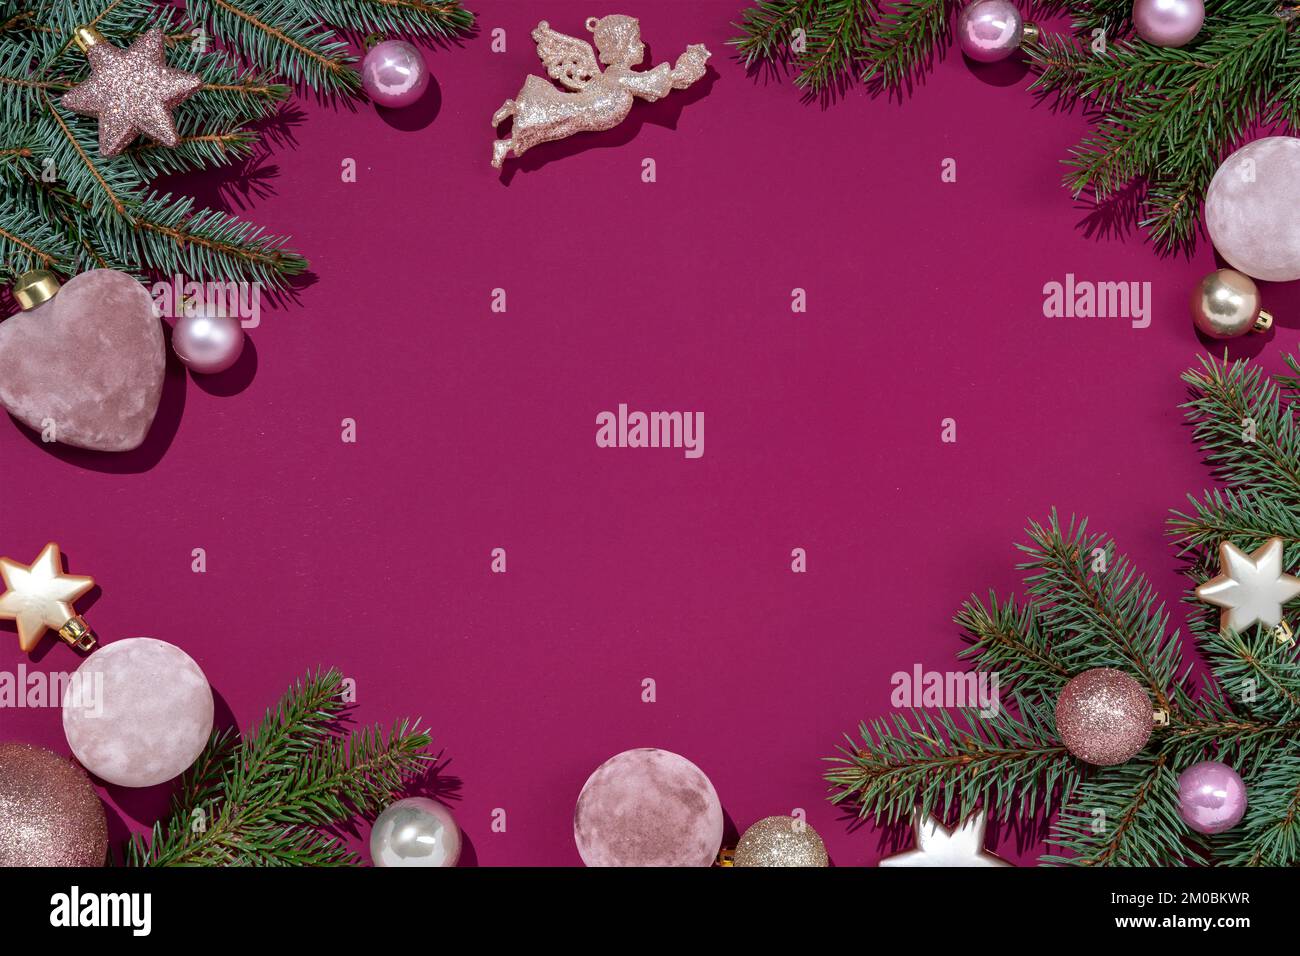 Christmas background with fir-tree branches and decoration toys. Merry Christmas and Happy New Year concept Stock Photo